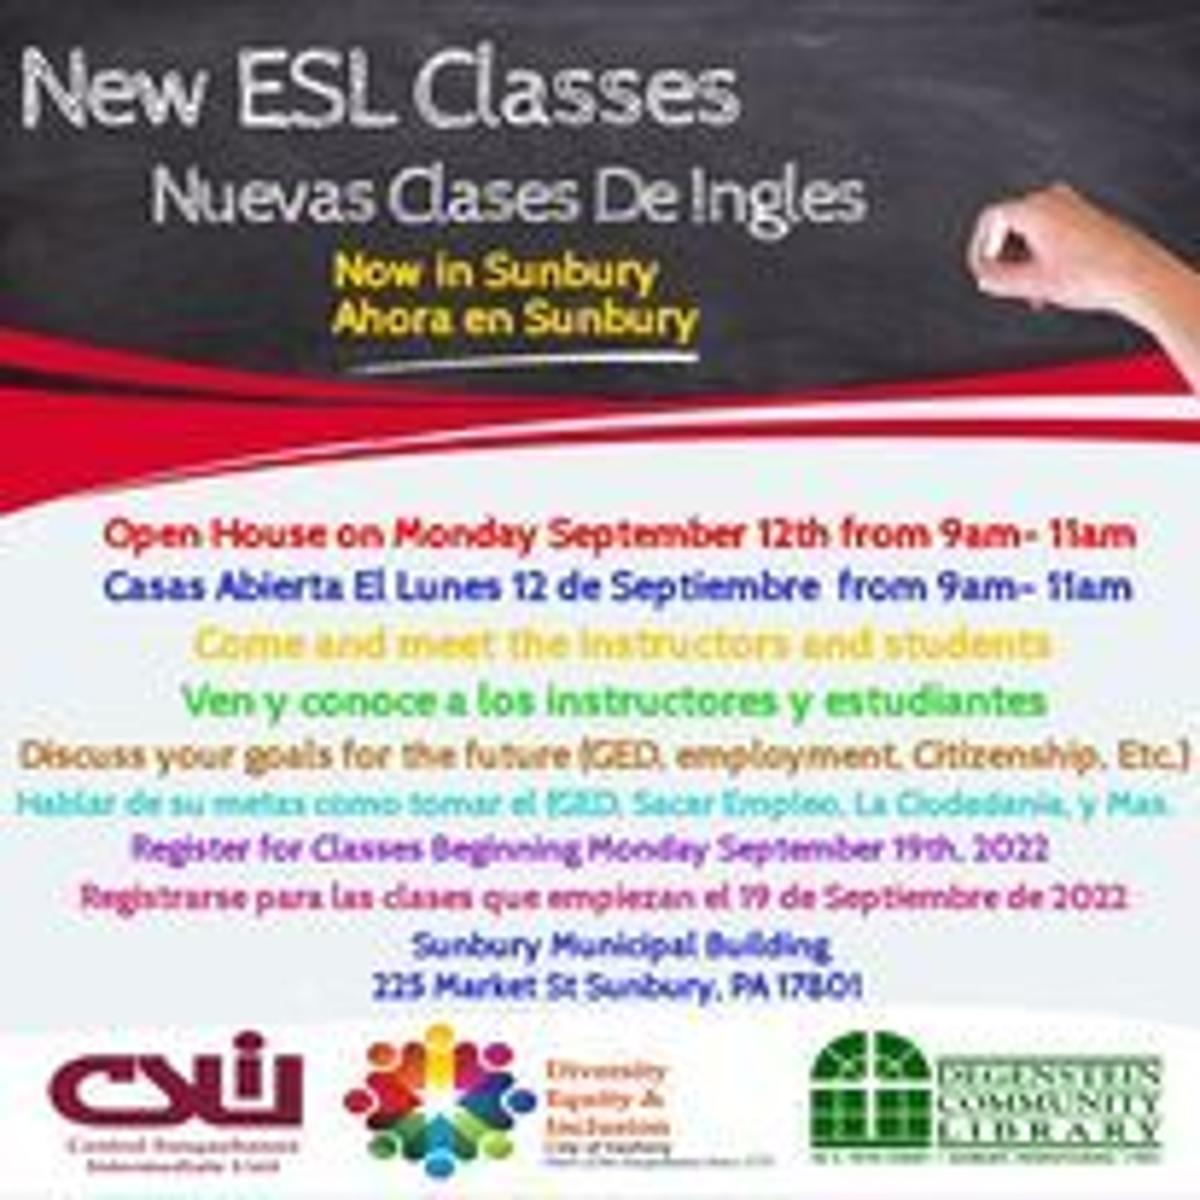 New ESL classes will be offered in Sunbury, News